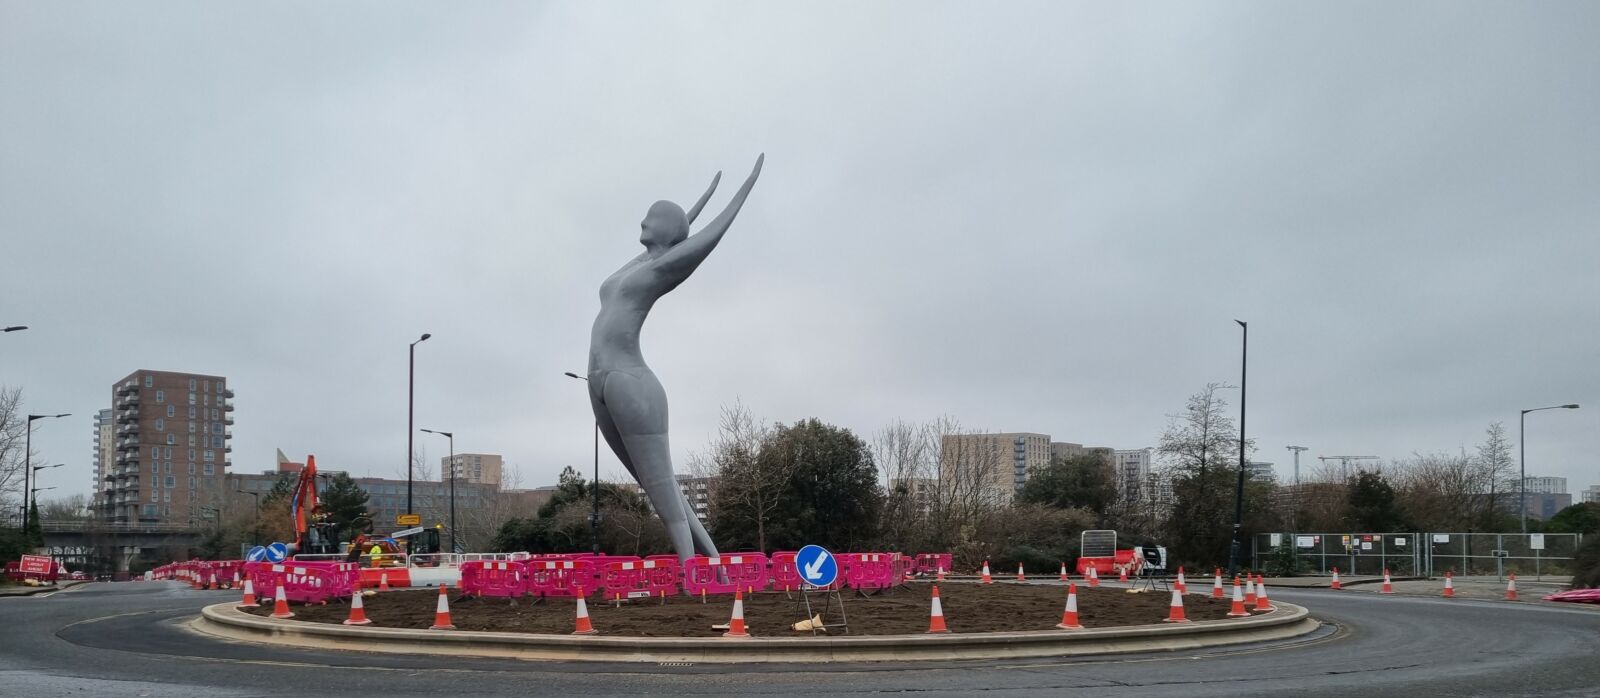 Statue of a lady with her arms in the air